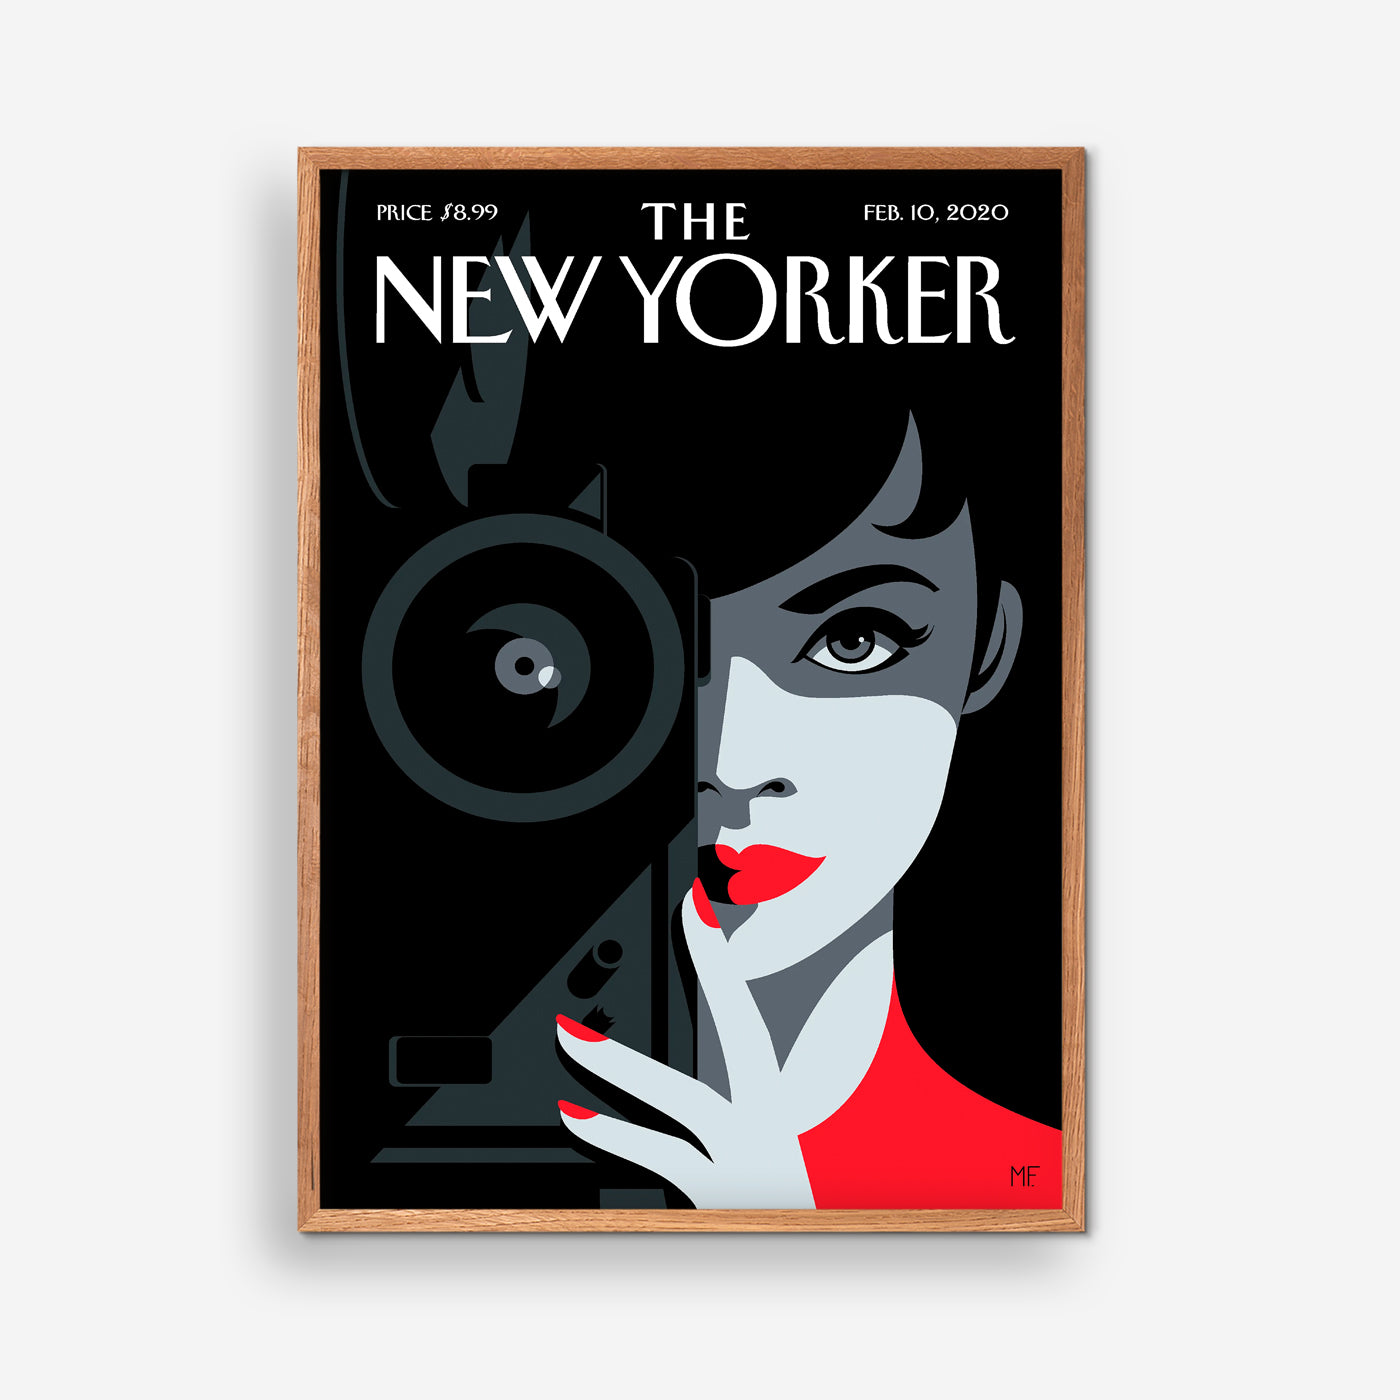 The New Yorker - Behind the Lens - Malika Favre